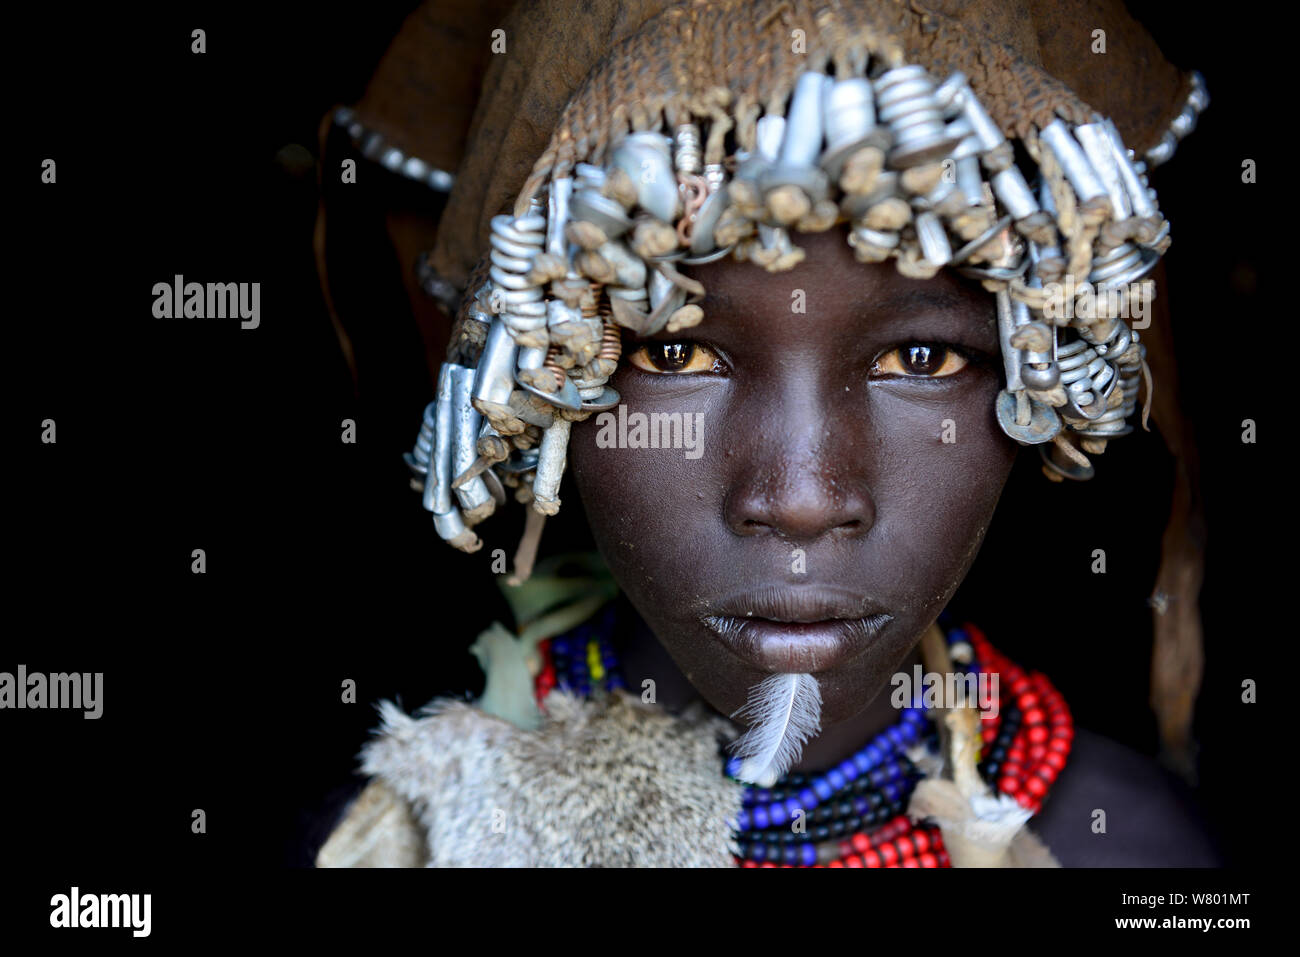 Dassanech girl with headdress of nuts and bolts, and feather on chin, Dassanech tribe, Lower Omo Valley. Ethiopia, November 2014 Stock Photo